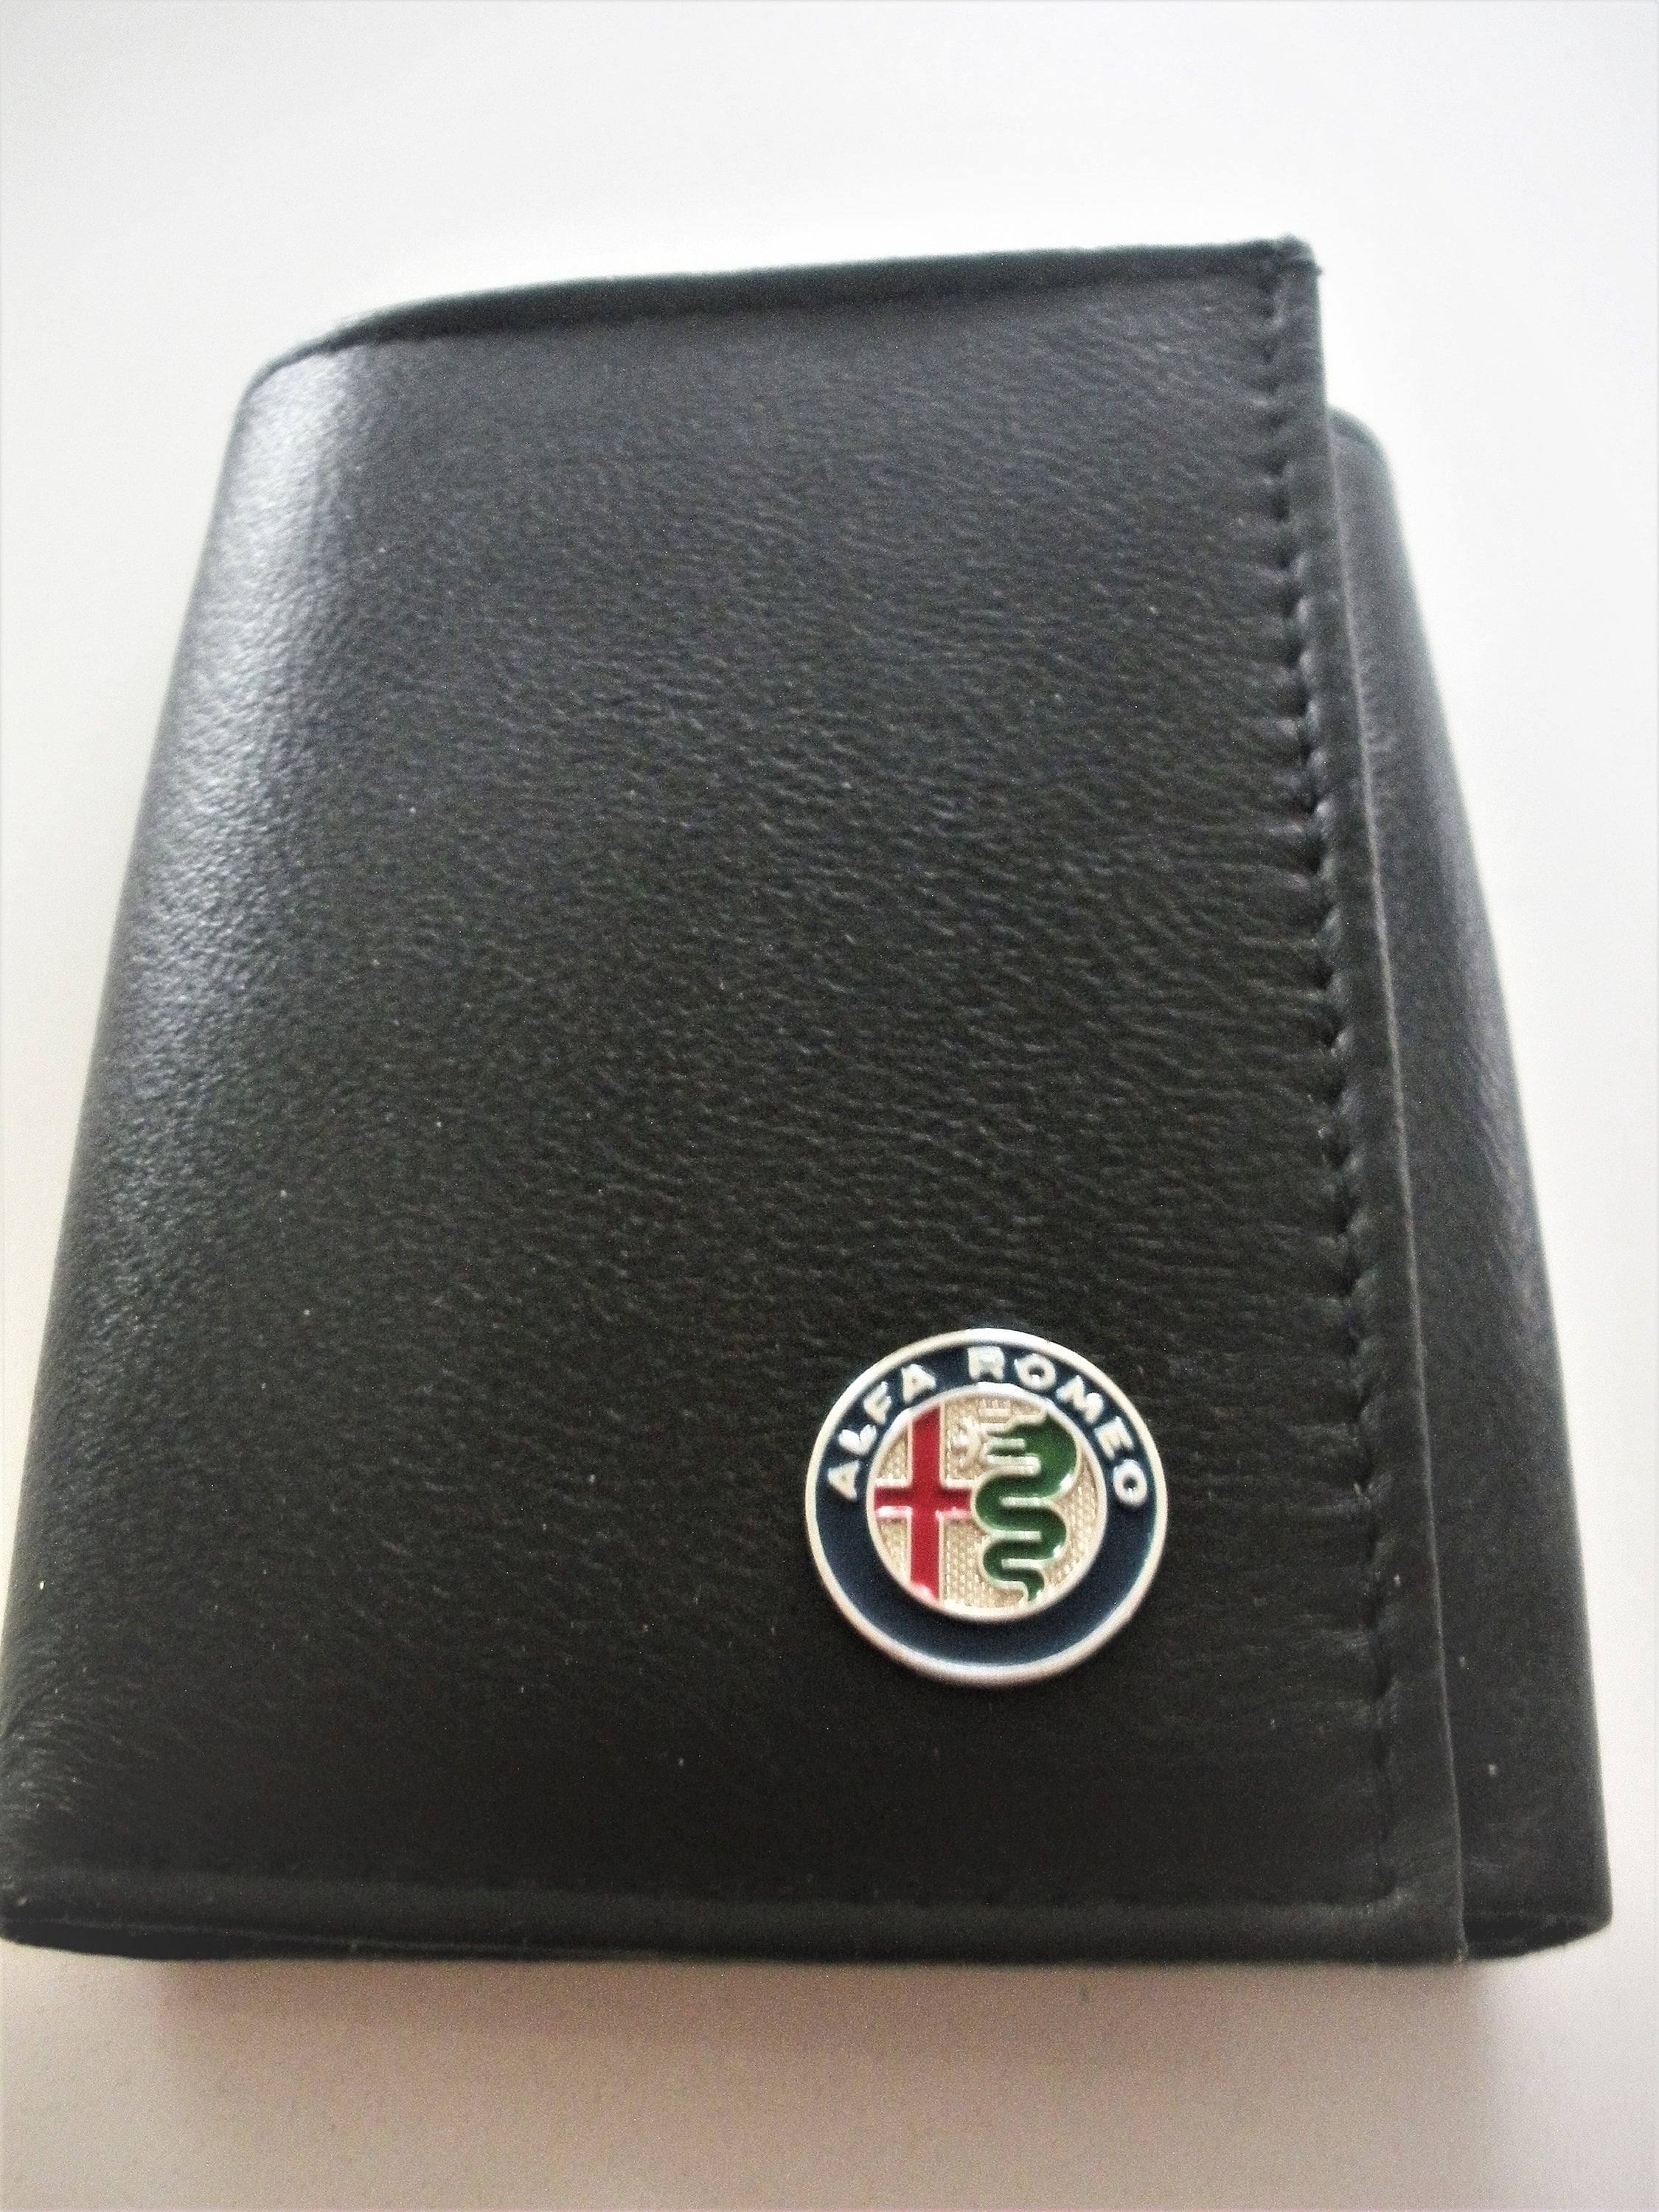 Alfa Romeo Top Grain Black Leather Trifold Wallet, RFID Protected Great Gift for Birthdays, Christmas , Father's Day, New Car Gift